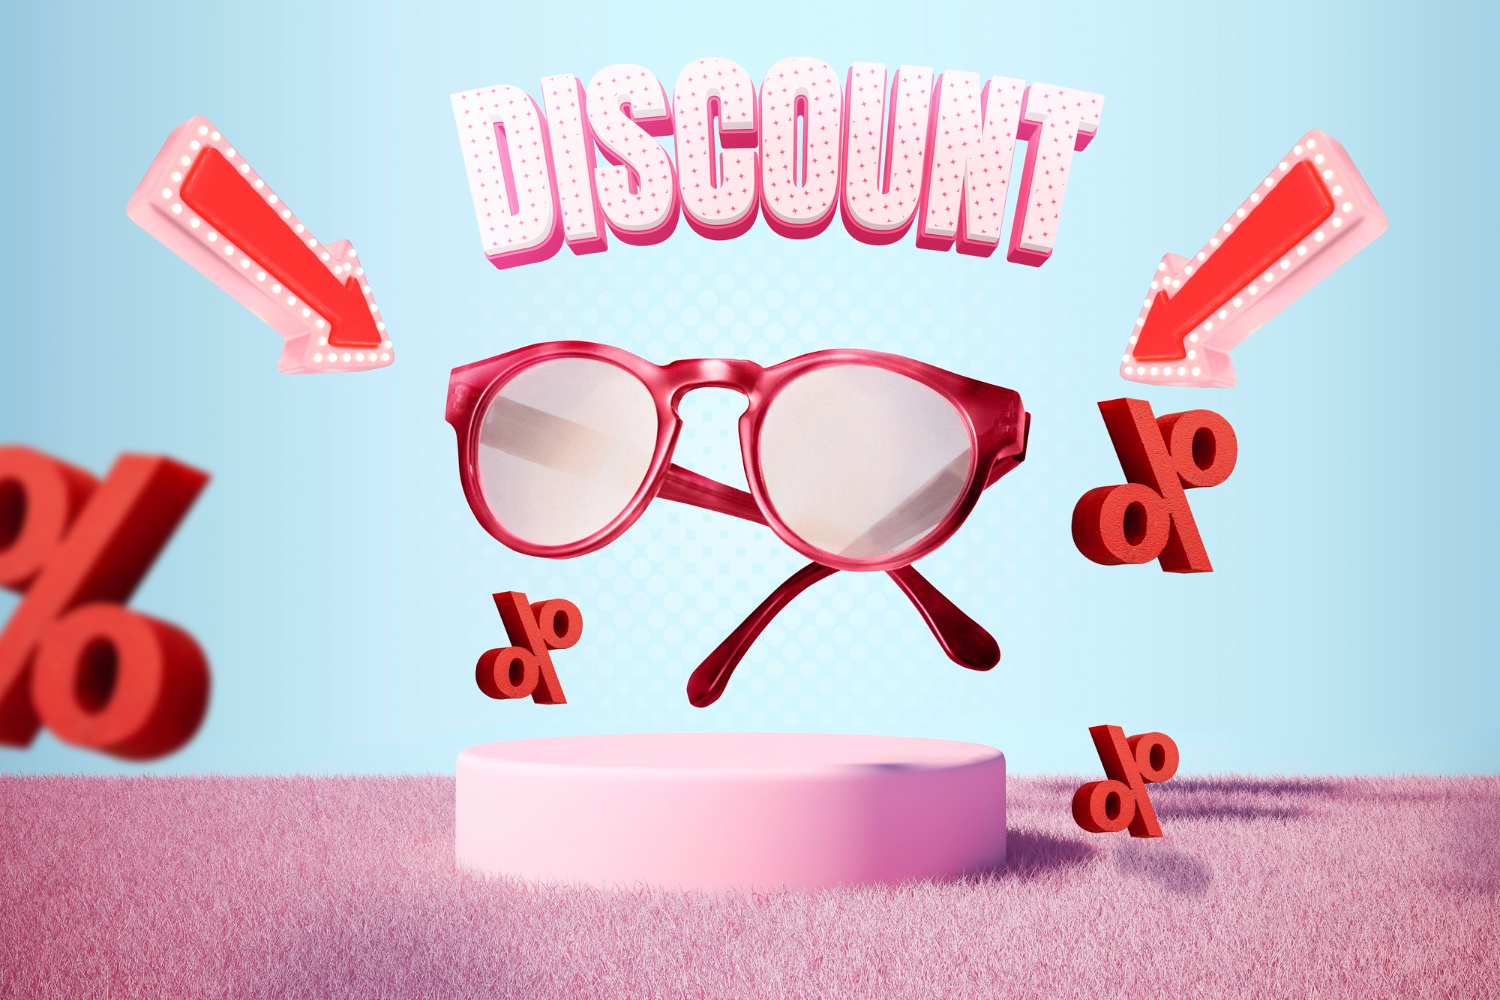 Unlock Huge Savings with Our Exclusive Promo Codes and Discounts